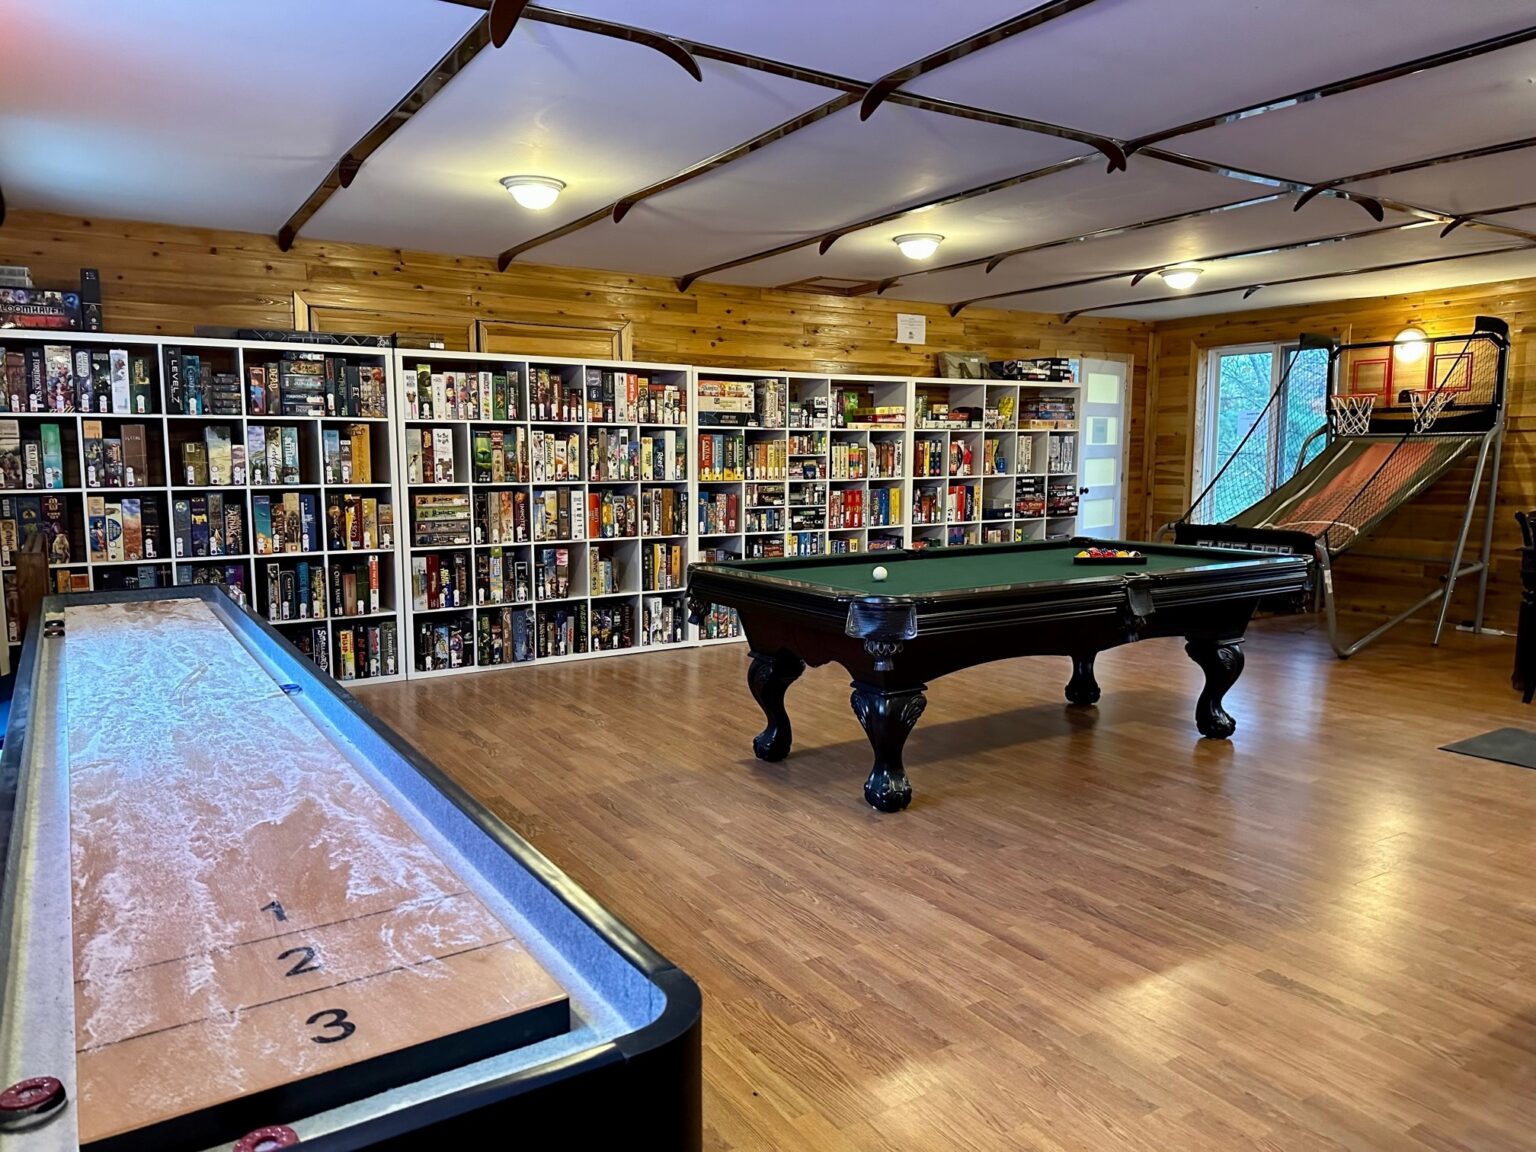 Games Galore : Our games room with over 500 board games, pool table, shuffle board, and arcade games